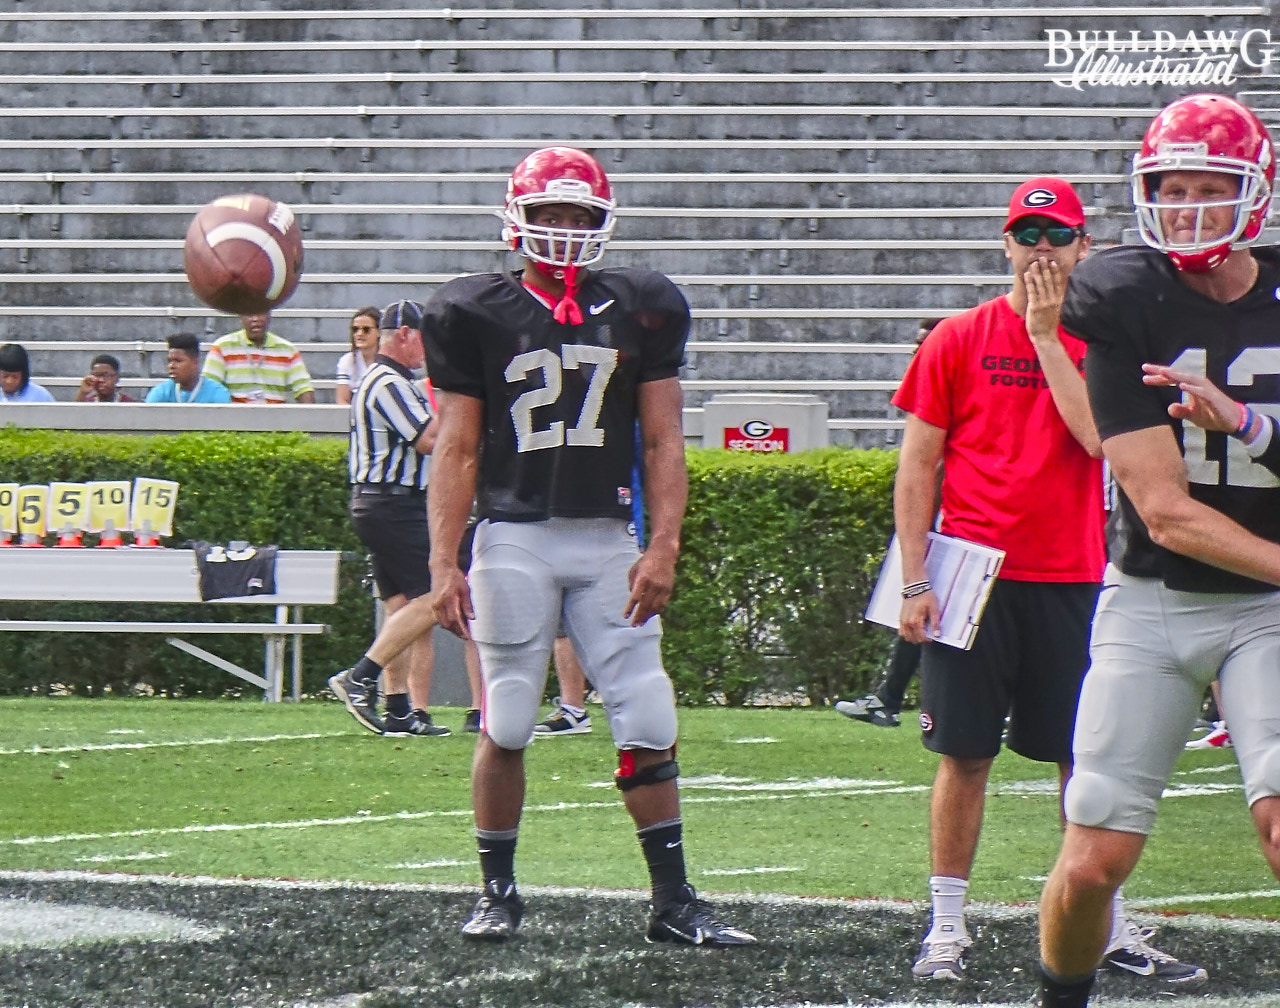 Brice Ramsey throws as Nick Chubb watches